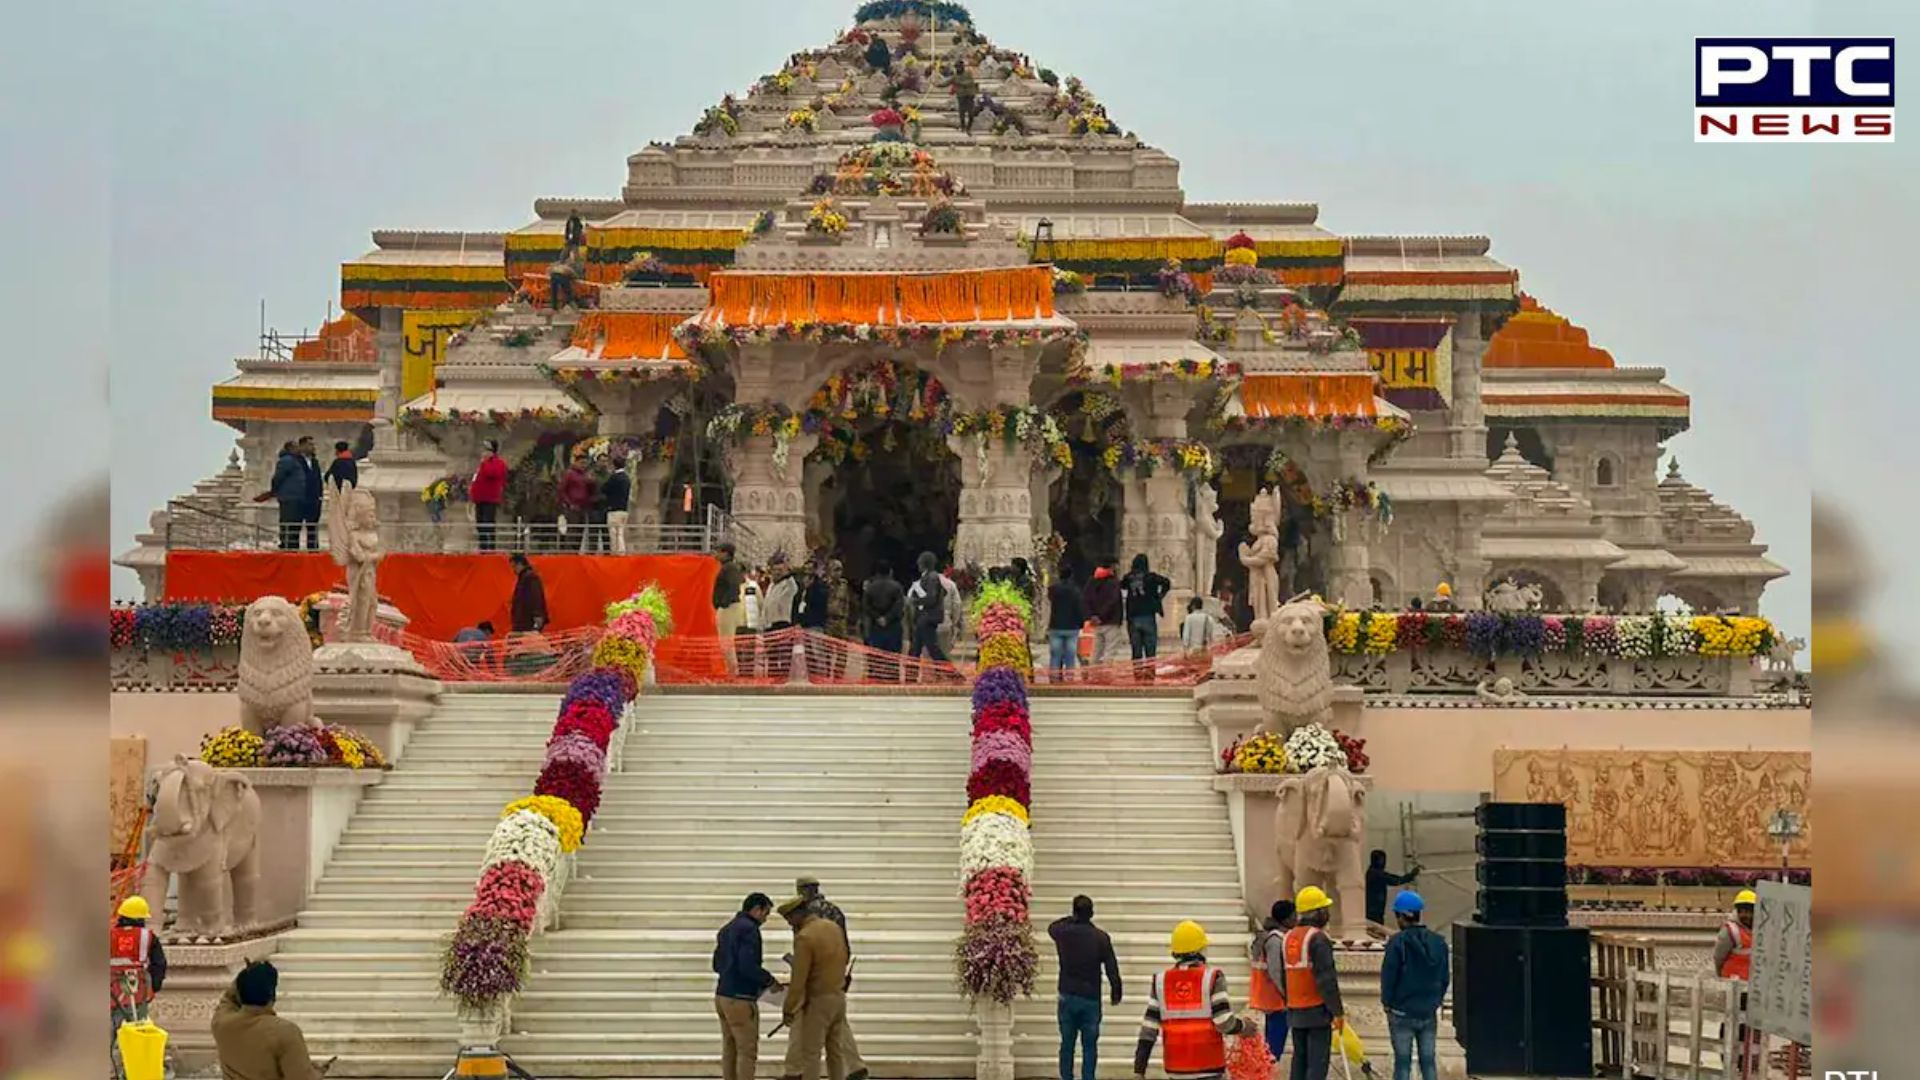 Ayodhya Ram temple: Significance, architectural details and more...